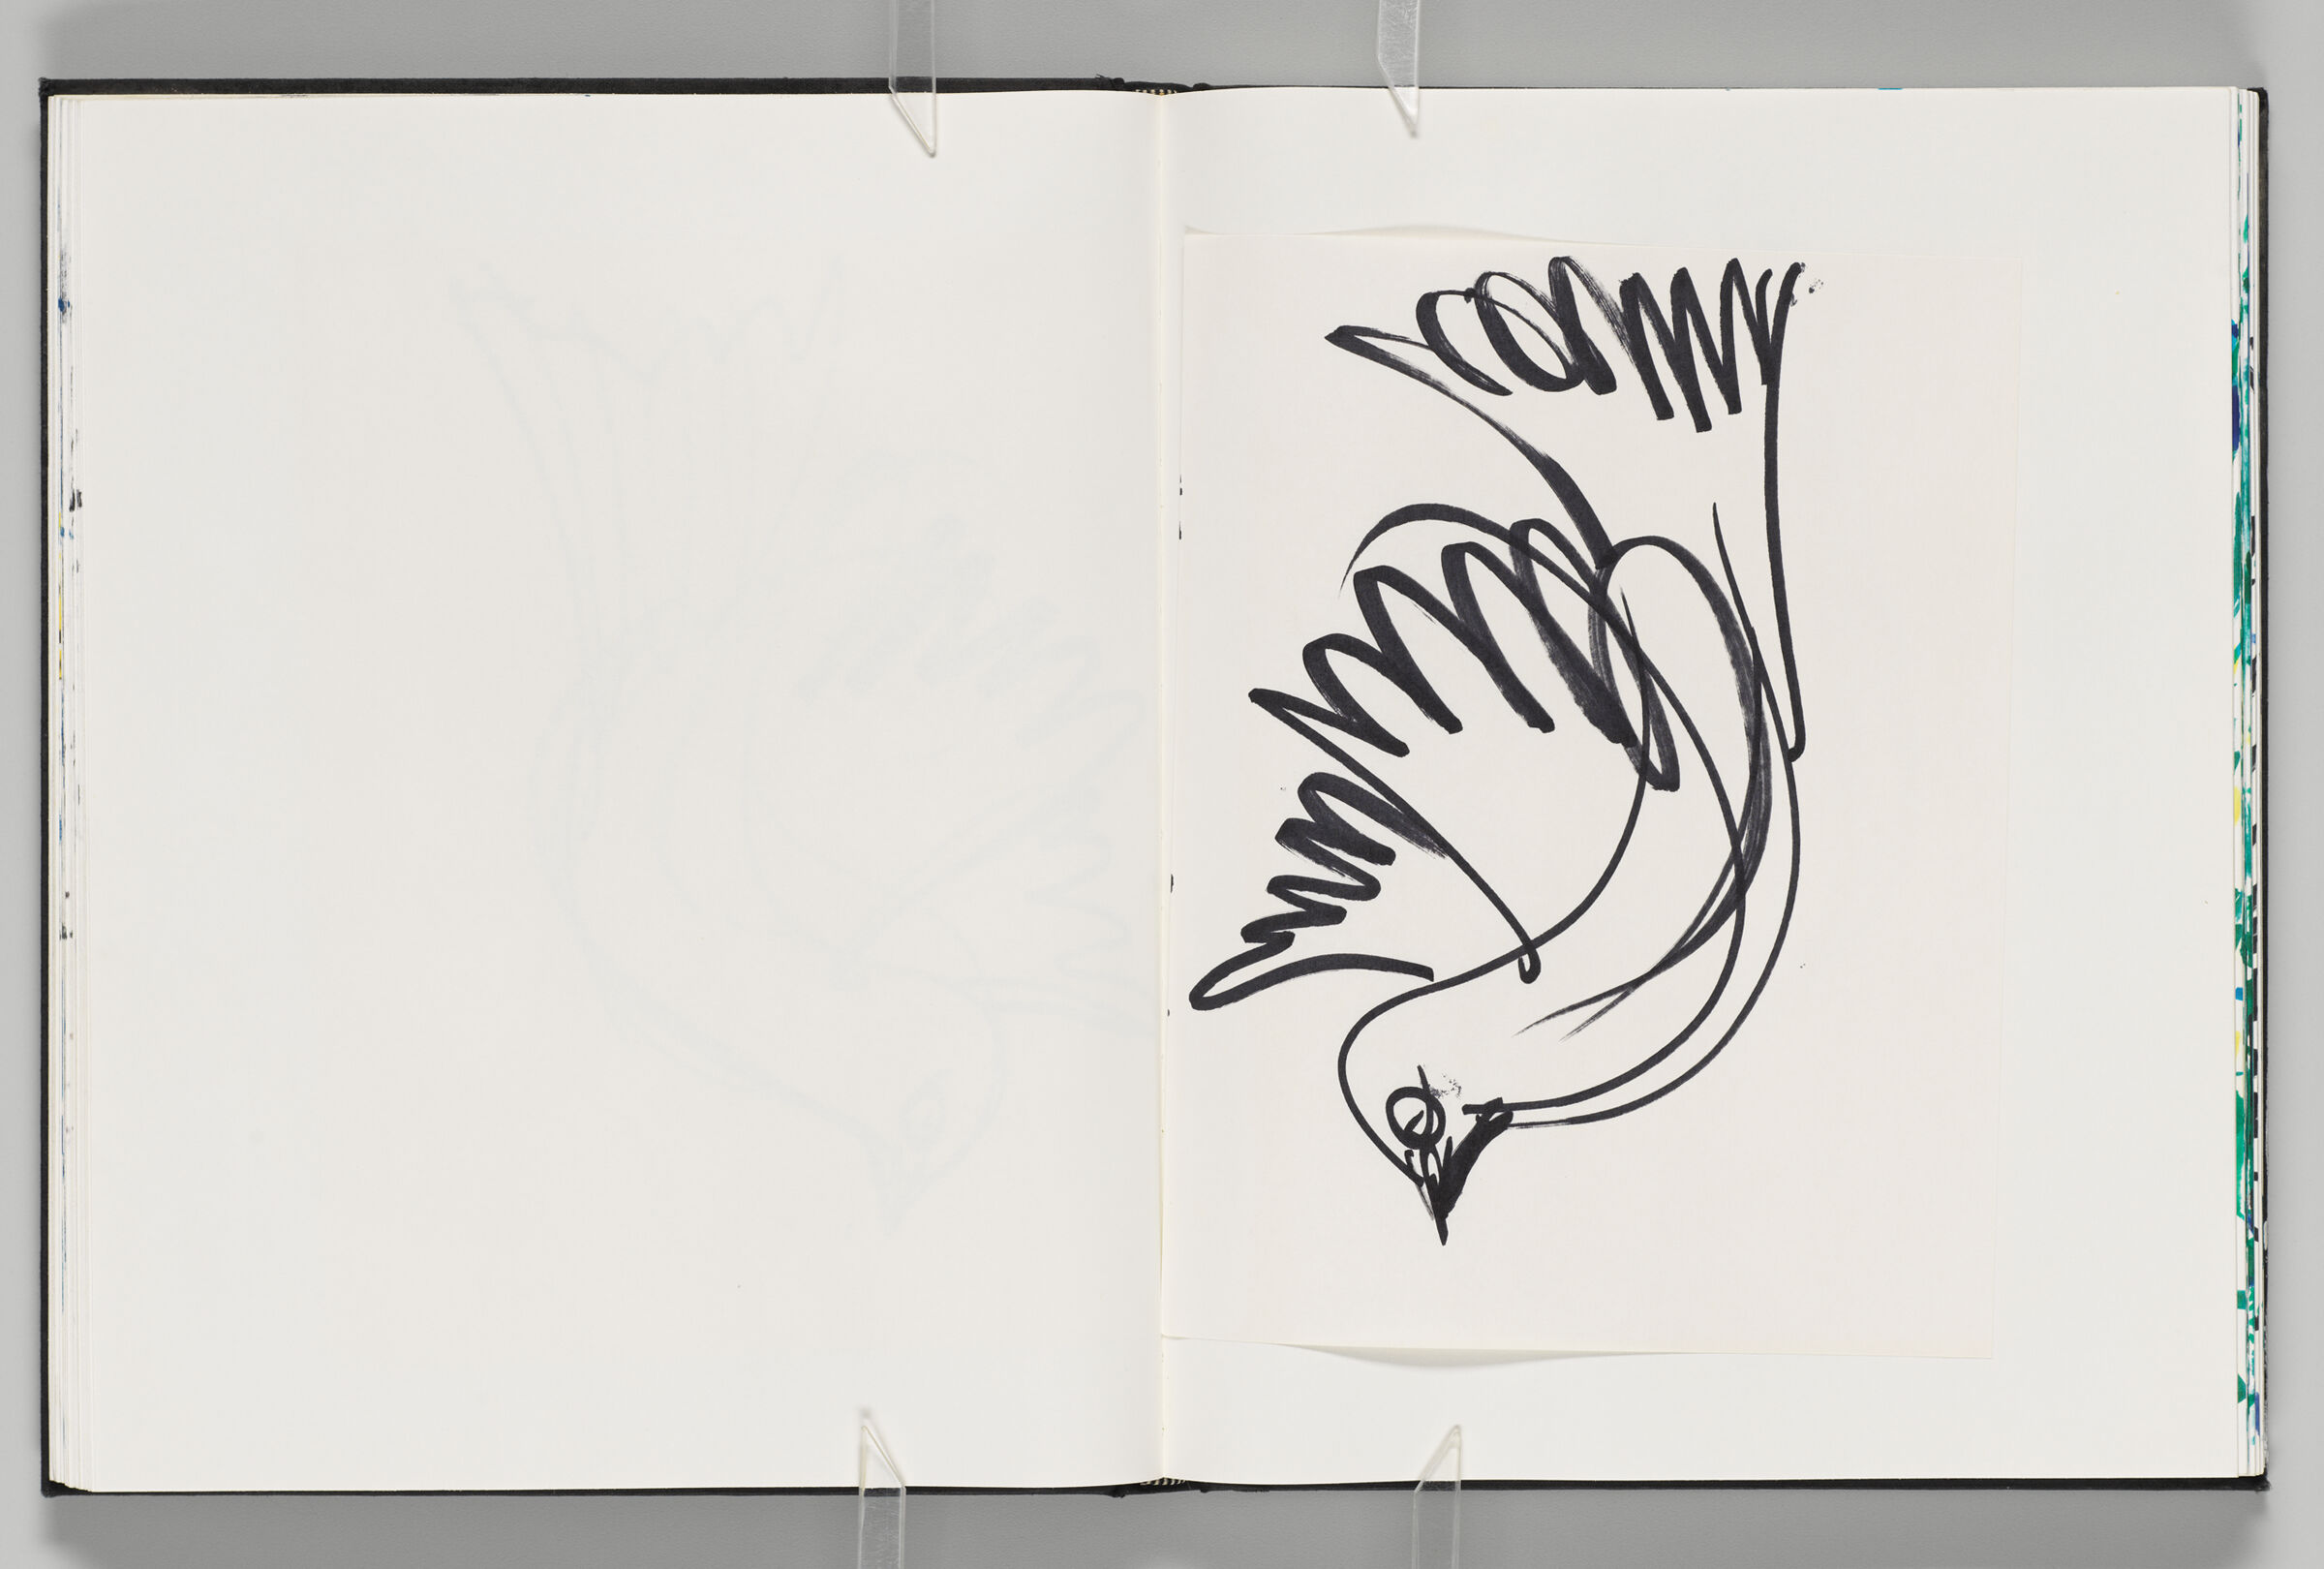 Untitled (Blank, Left Page); Untitled (Dove On Adhered Sheet, Right Page)